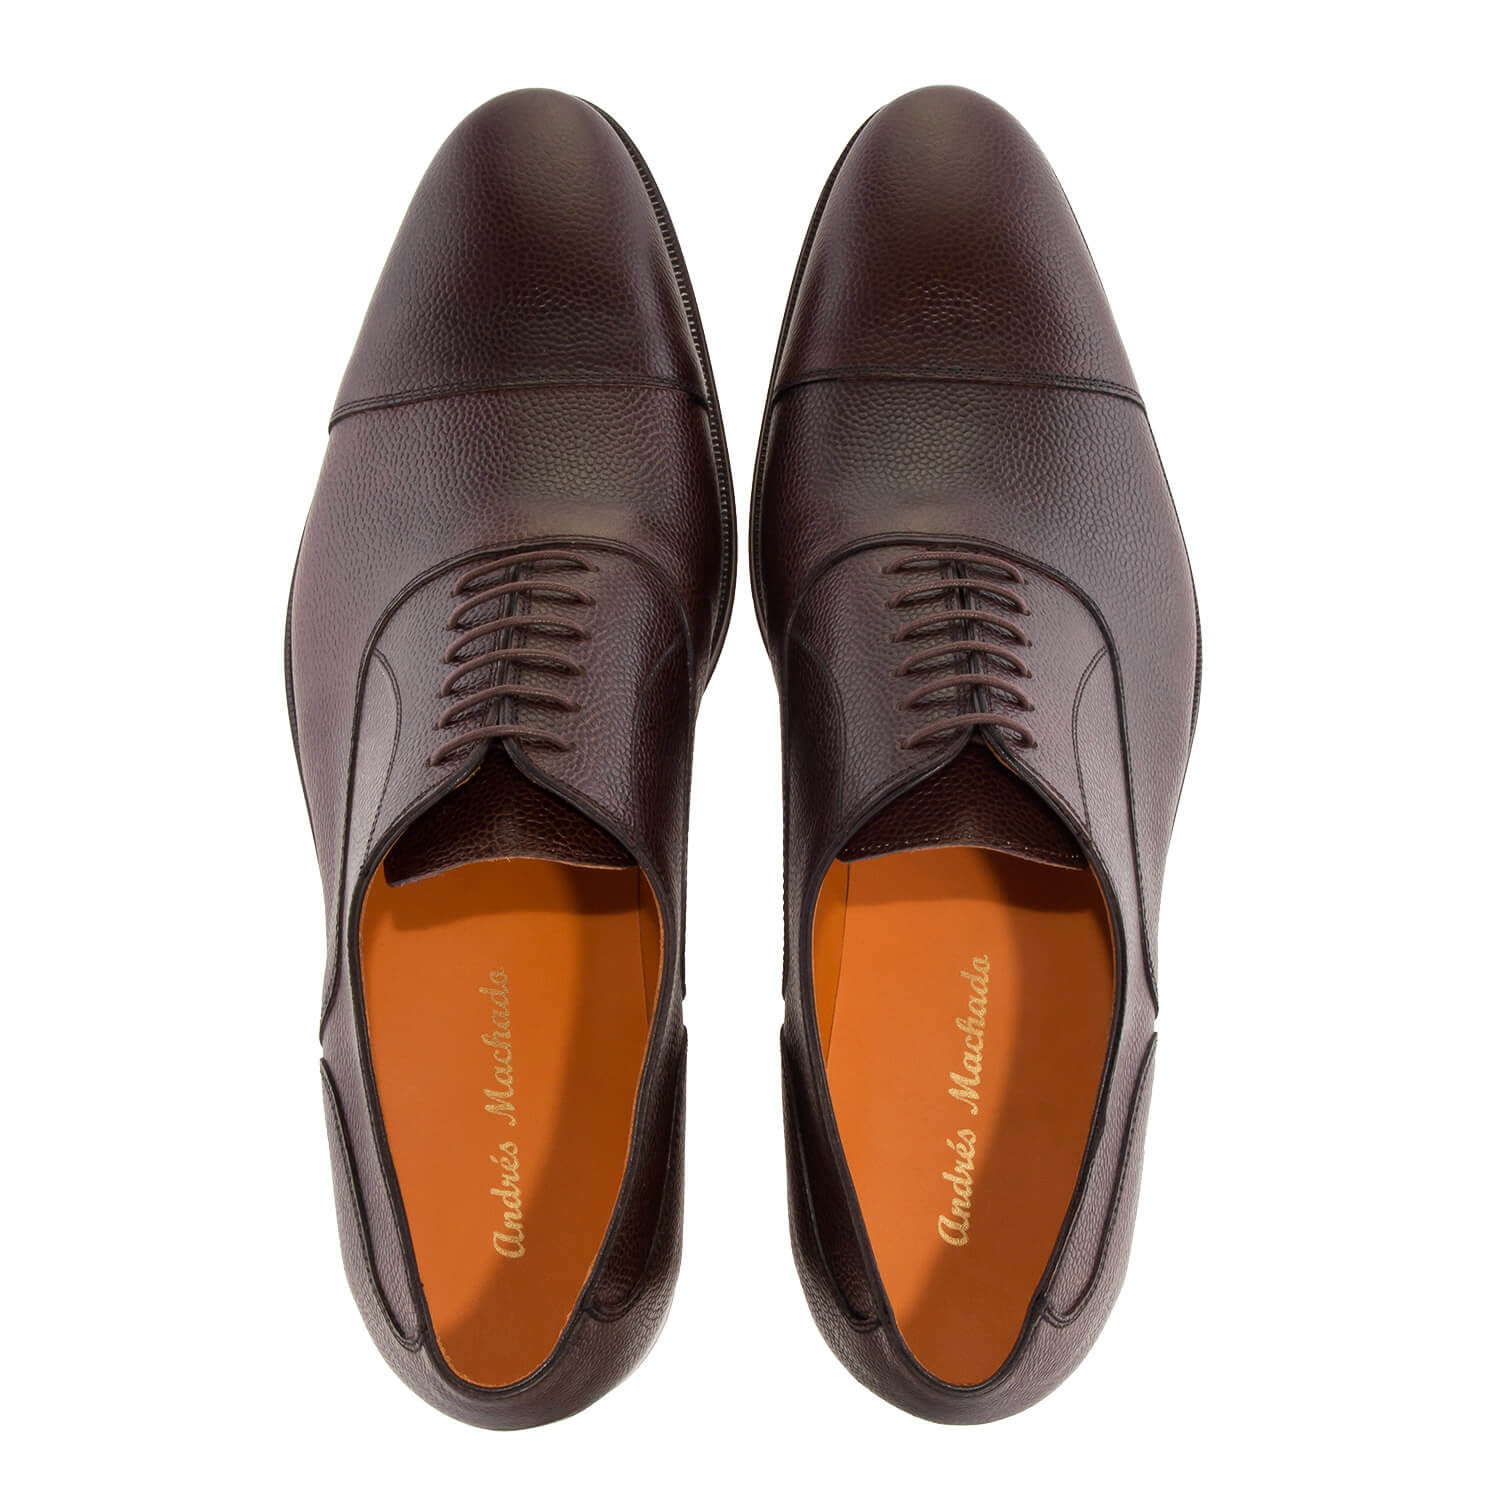 Oxford style Shoes in Dark Brown Grained Leather - Men, Dress shoes ...